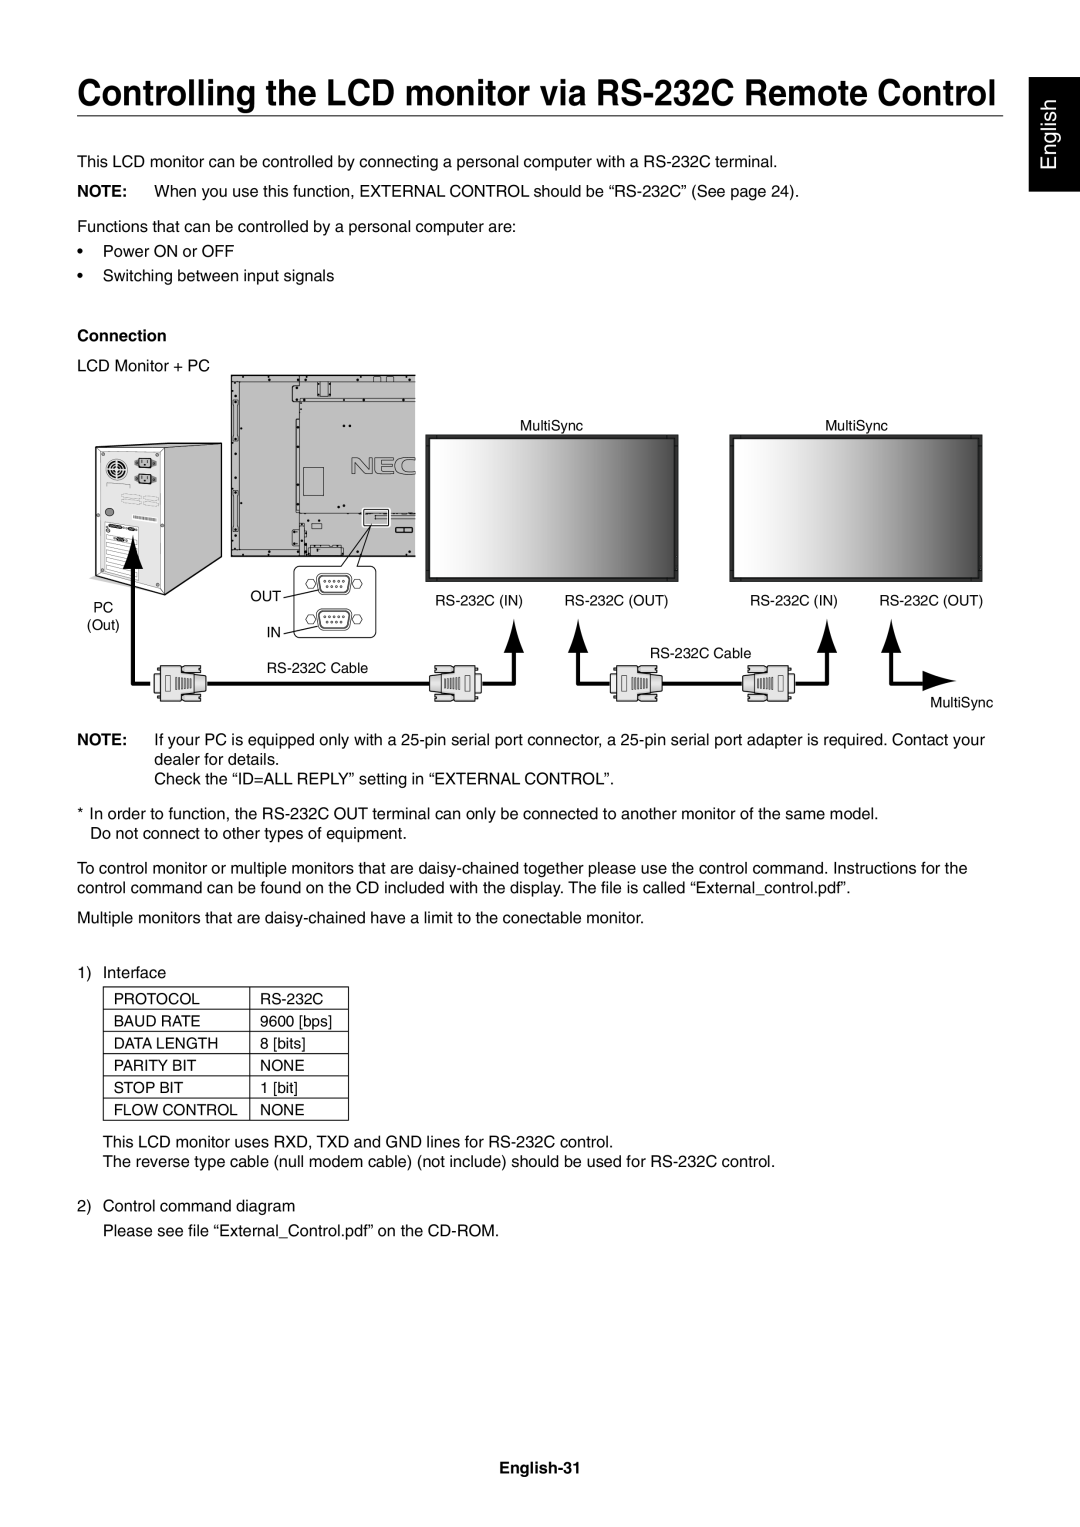 NEC V551, V651, V422 user manual Connection, English-31, Controlling the LCD monitor via RS-232C Remote Control 